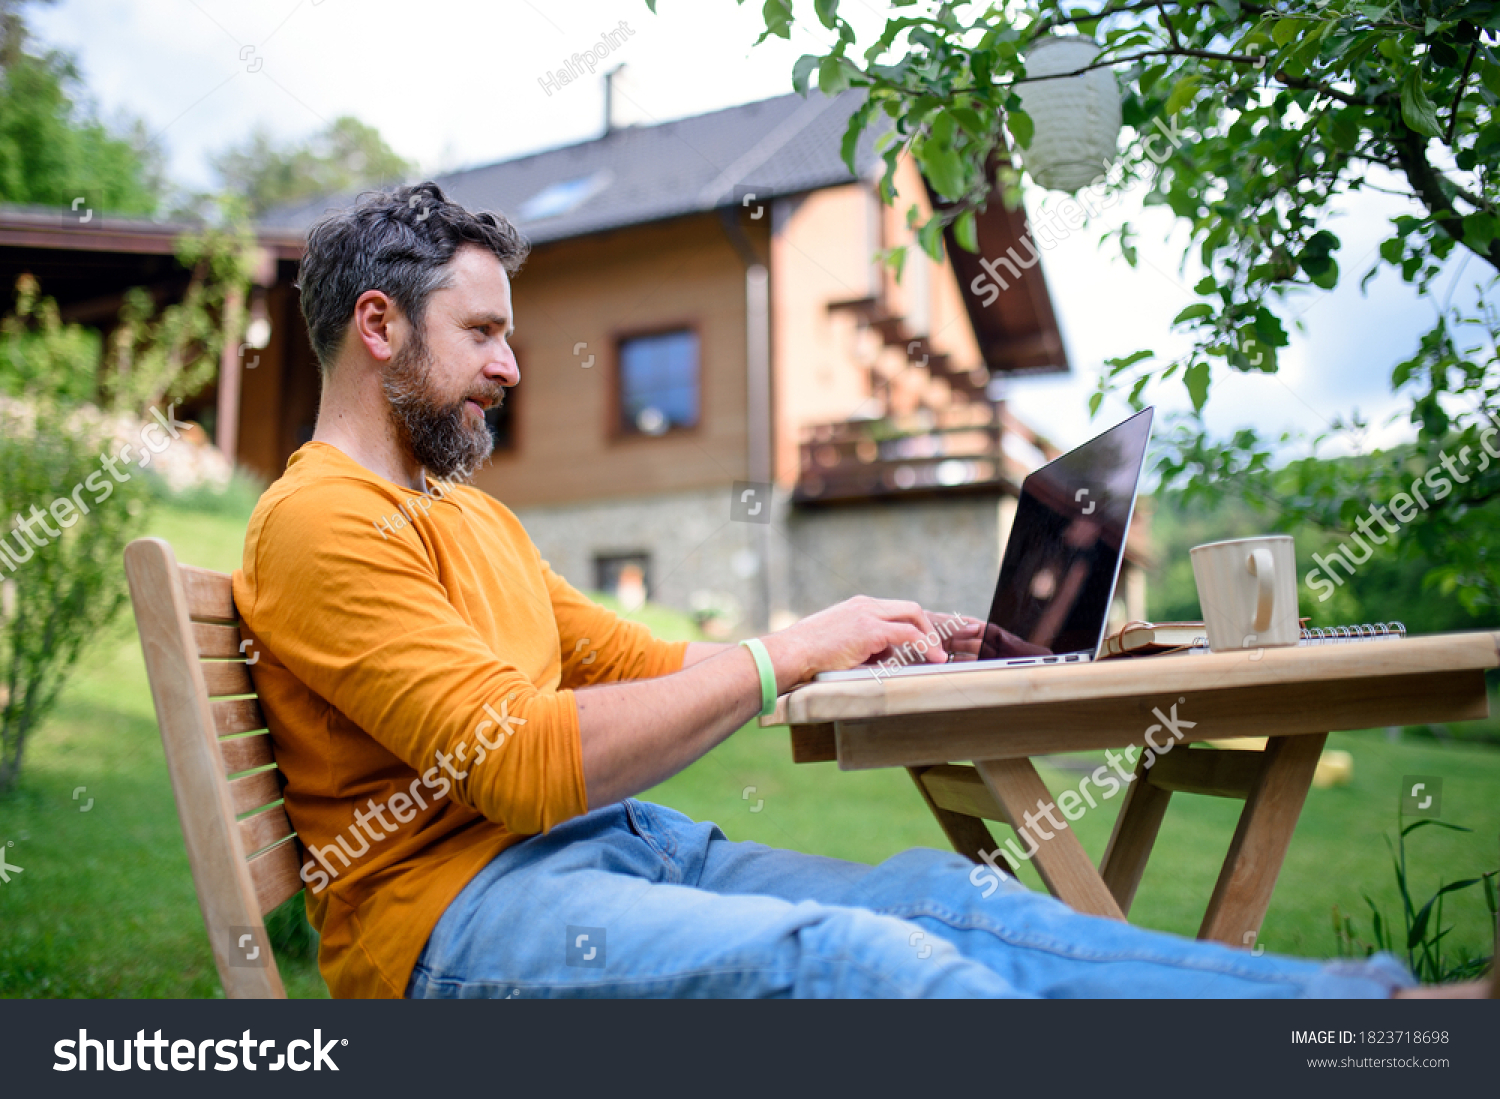 Side view of man with laptop working outdoors in garden, home office concept. #1823718698